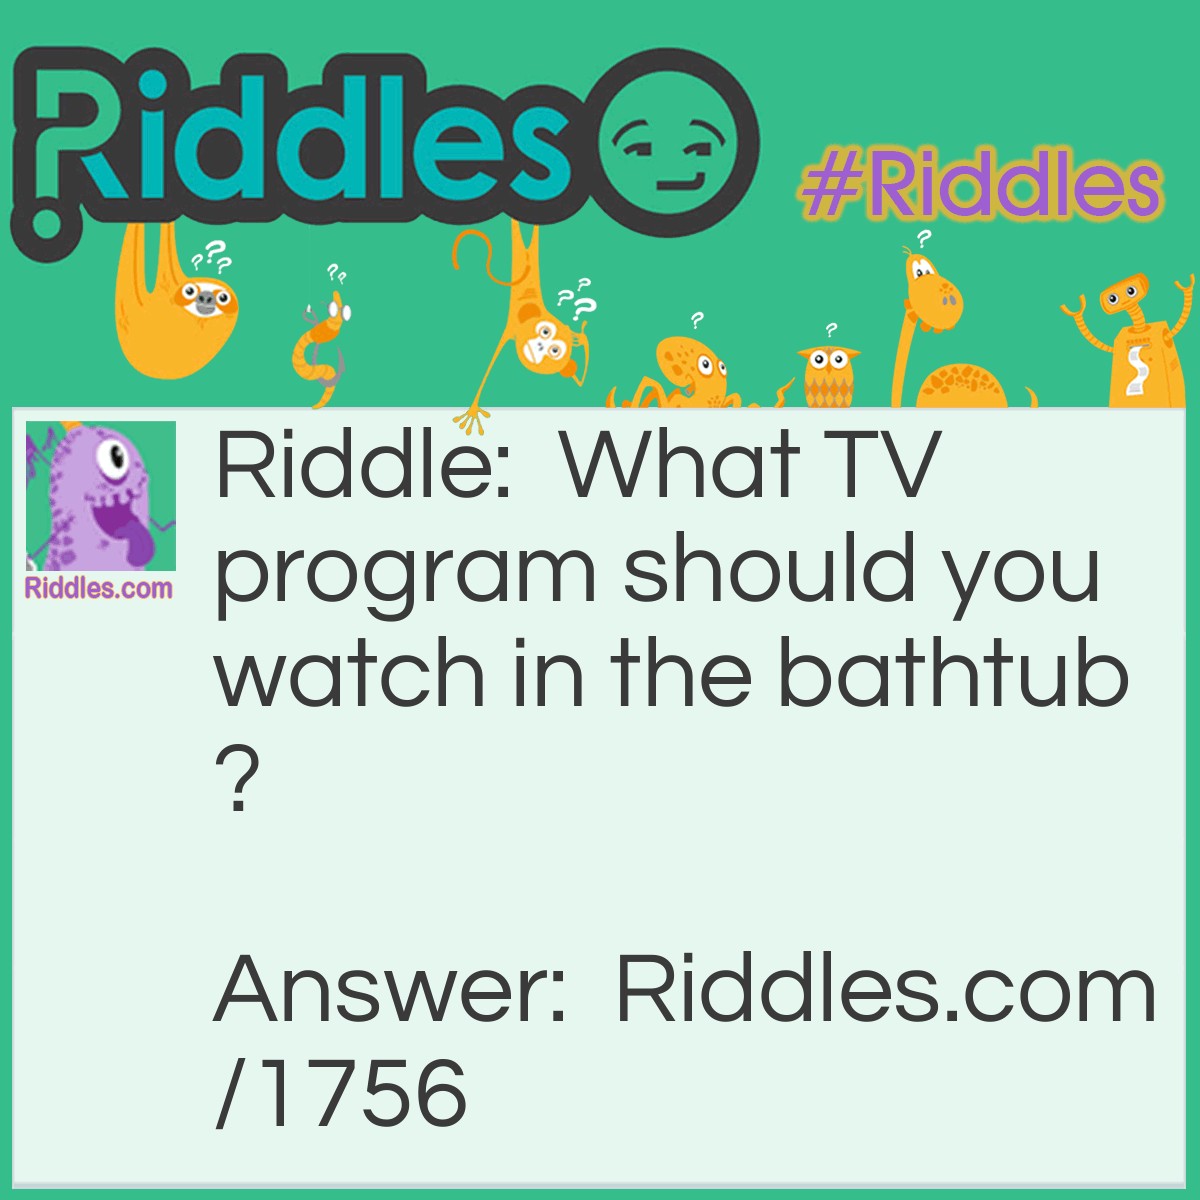 Riddle: What TV program should you watch in the bathtub? Answer: Soap operas.